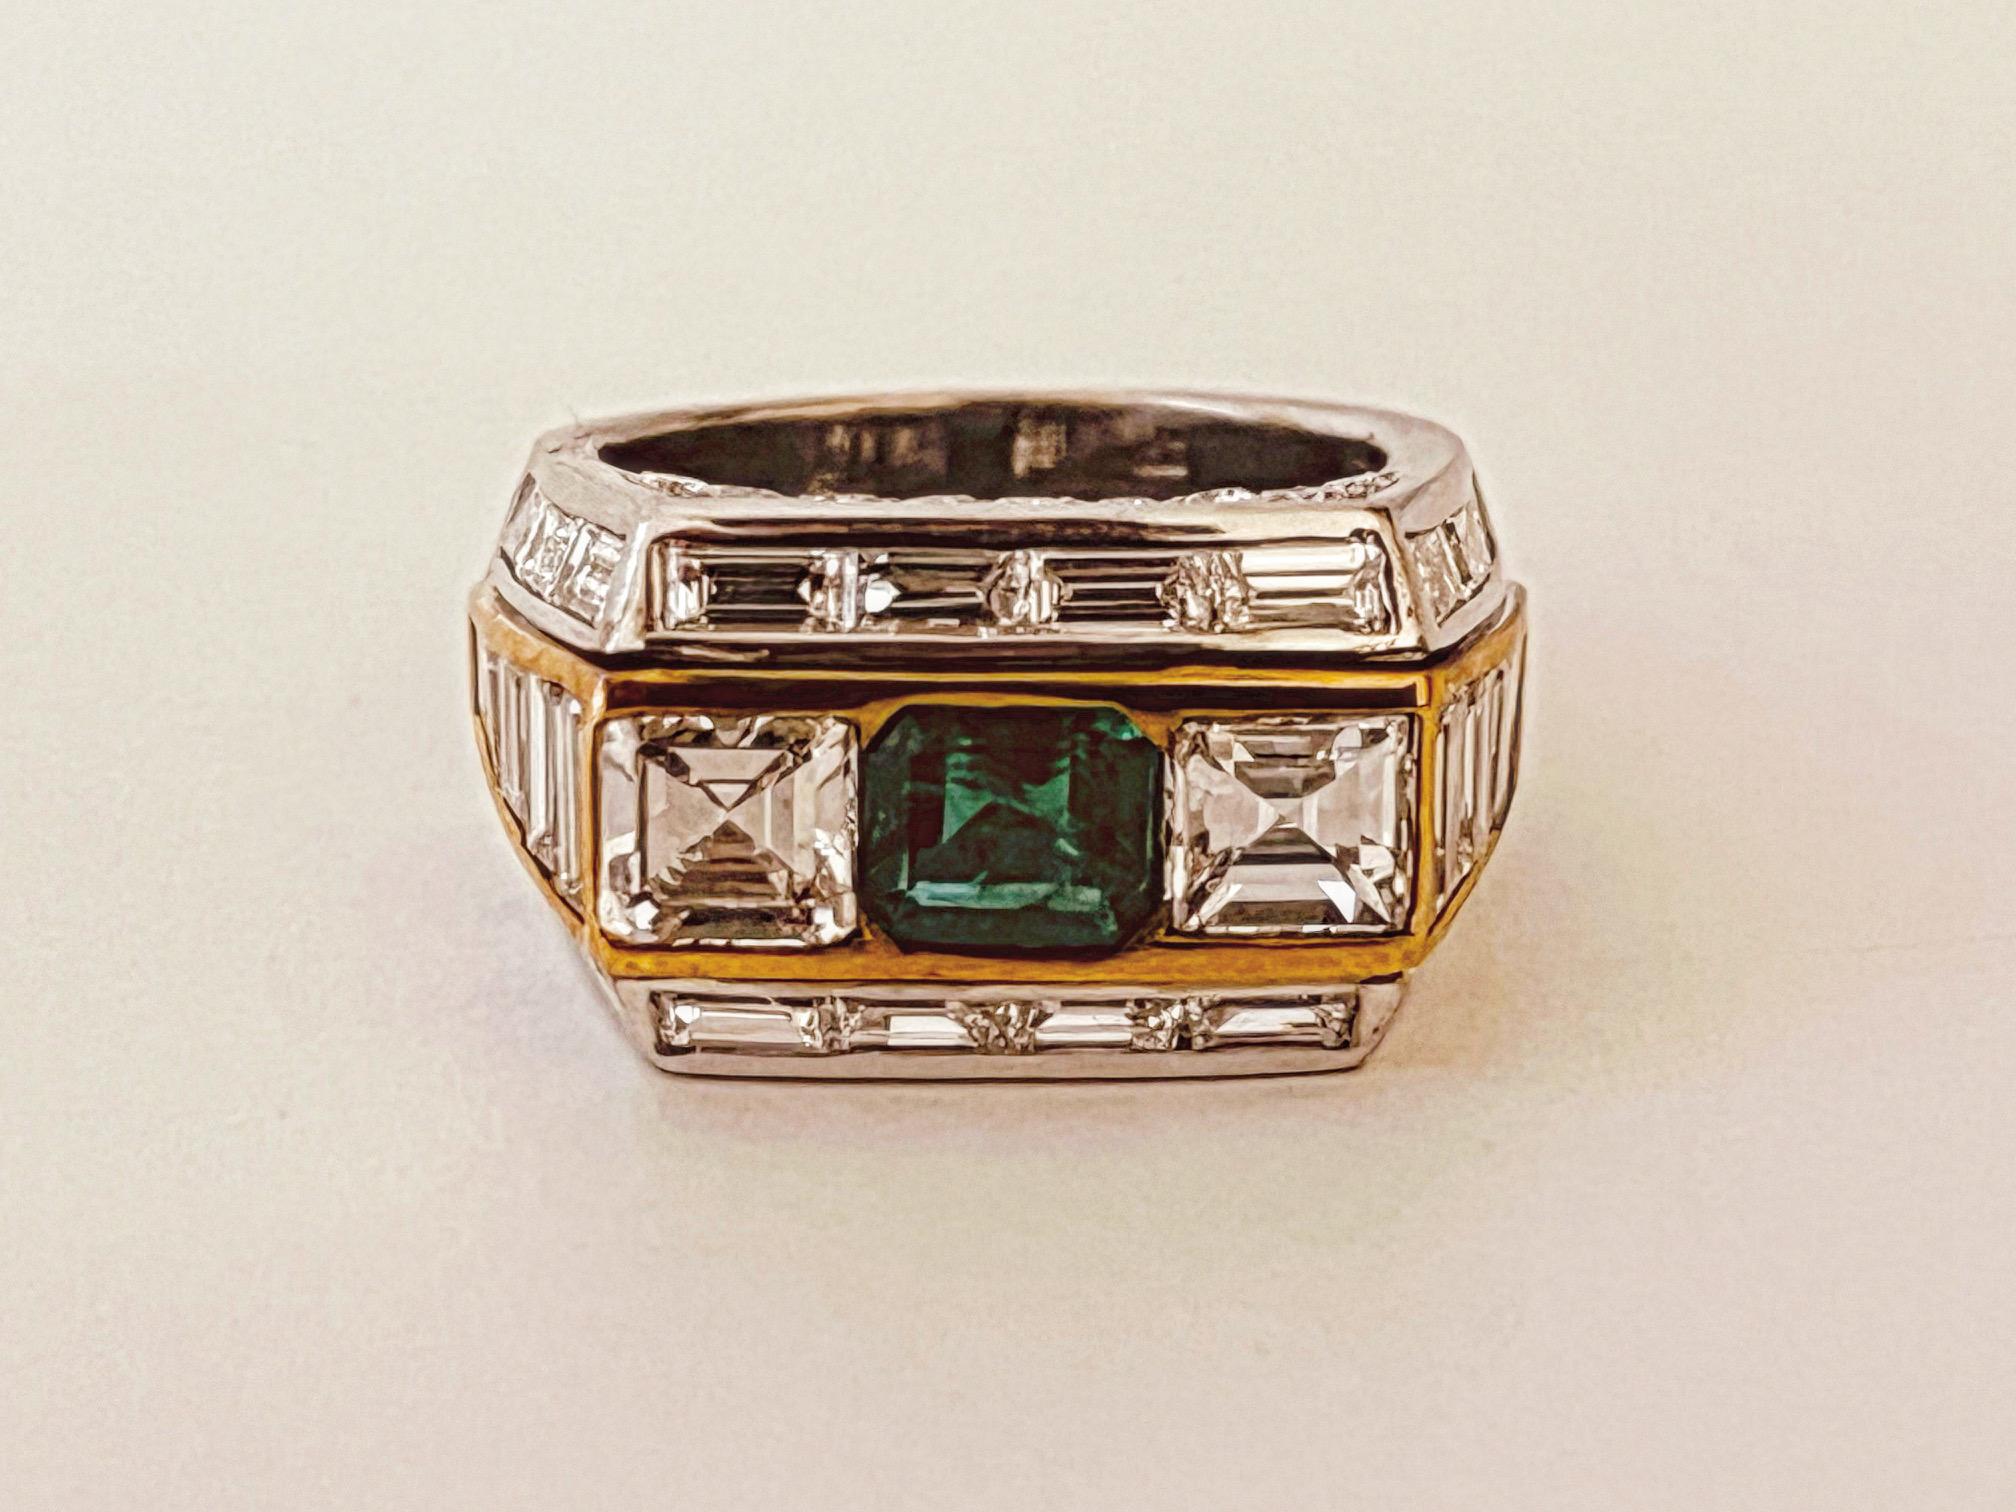 Emerald and Diamond ring. The central  section mounted with an emerald and flanked by two emerald cut diamonds of 1.6cts. The square shaped sides with graduating baguette shoulders. The whole outlined with a row of baguette diamonds. Emerald